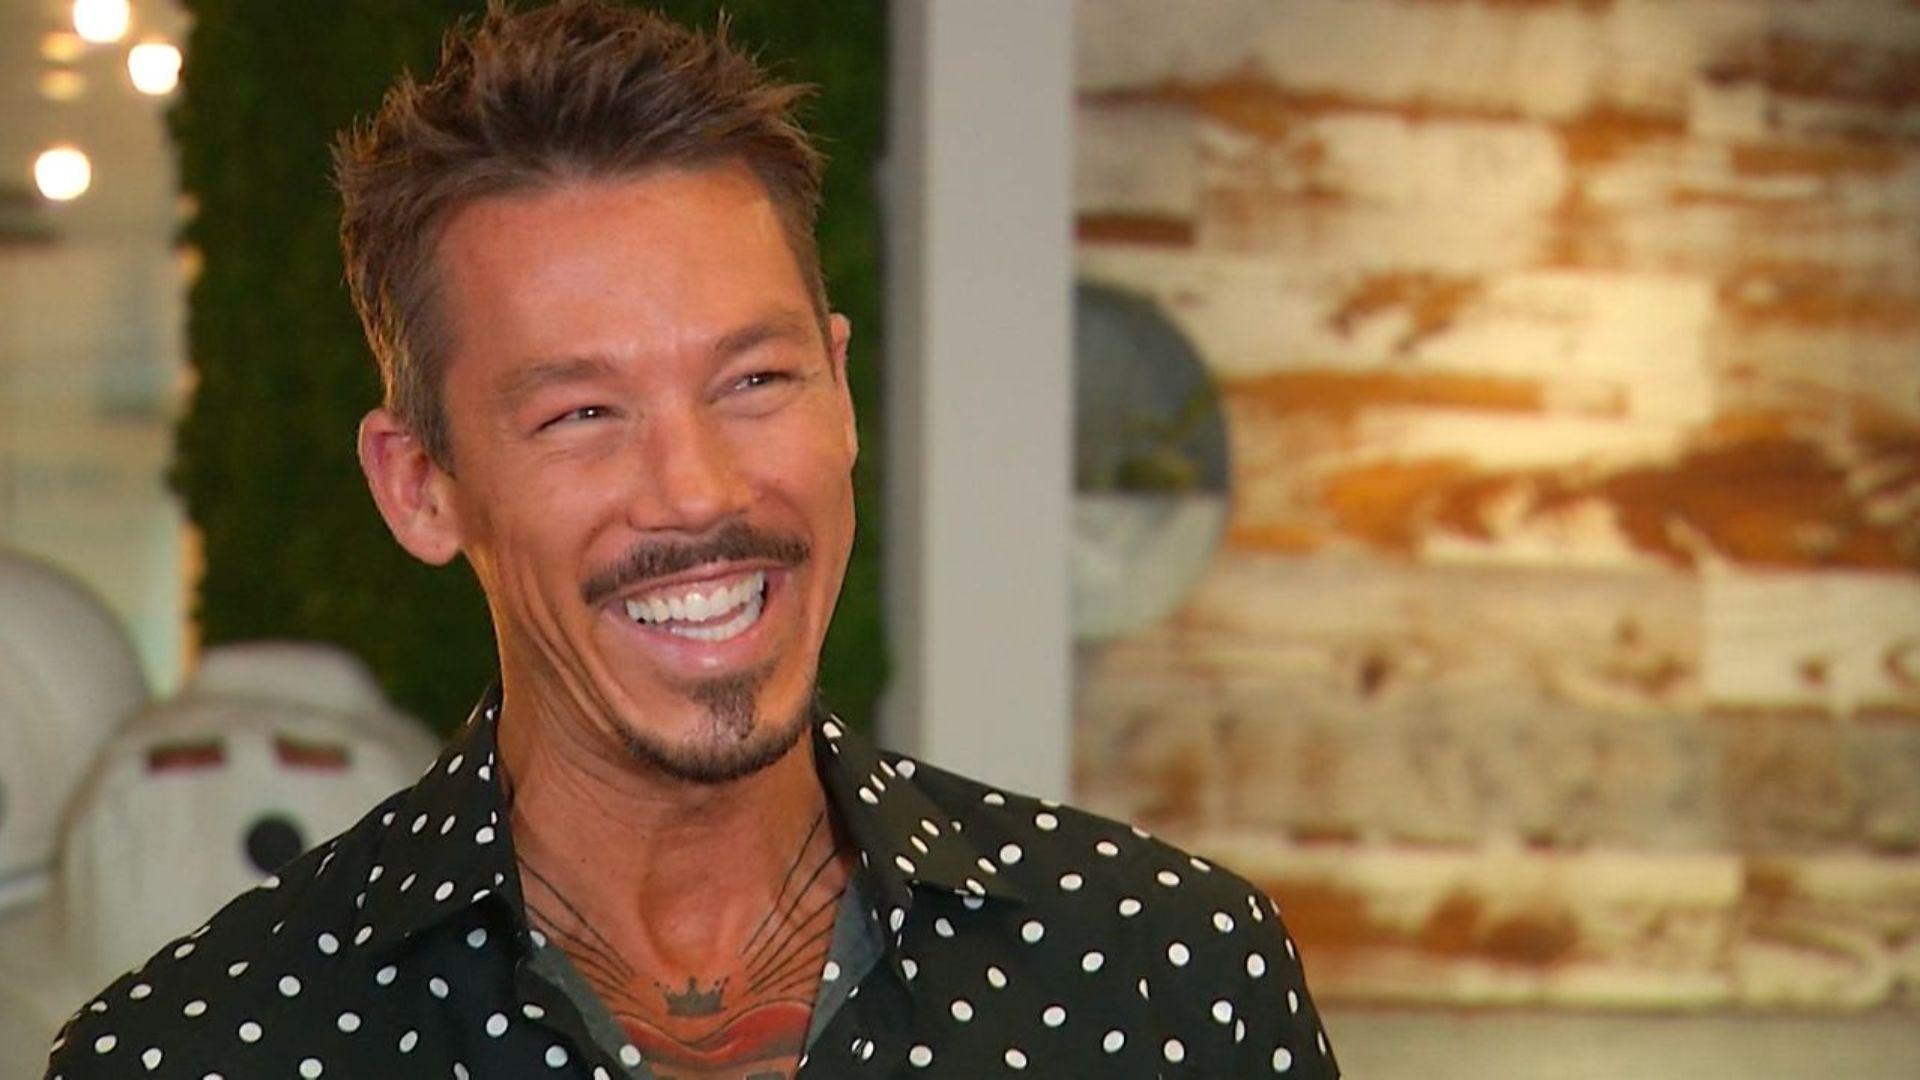 David Bromstad Smiling With Mouth Wide Open